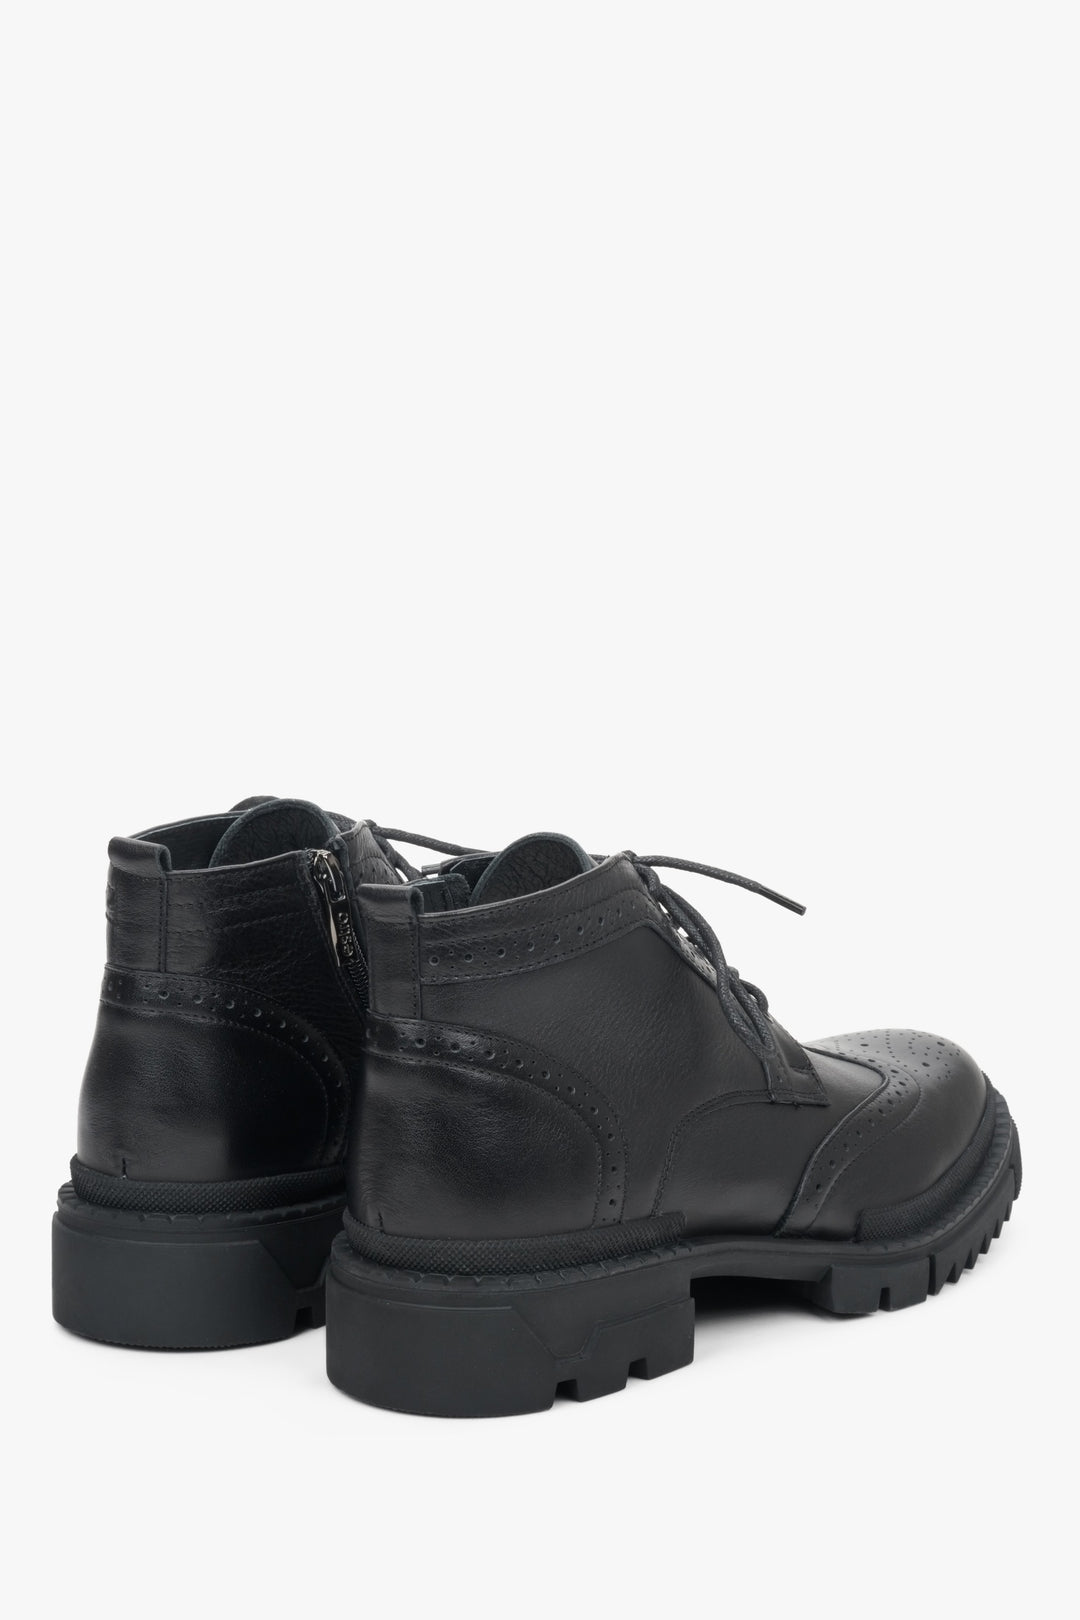 Elevated women's ankle boots made from genuine black leather - close-up of the heel counter and the back of the shoe.